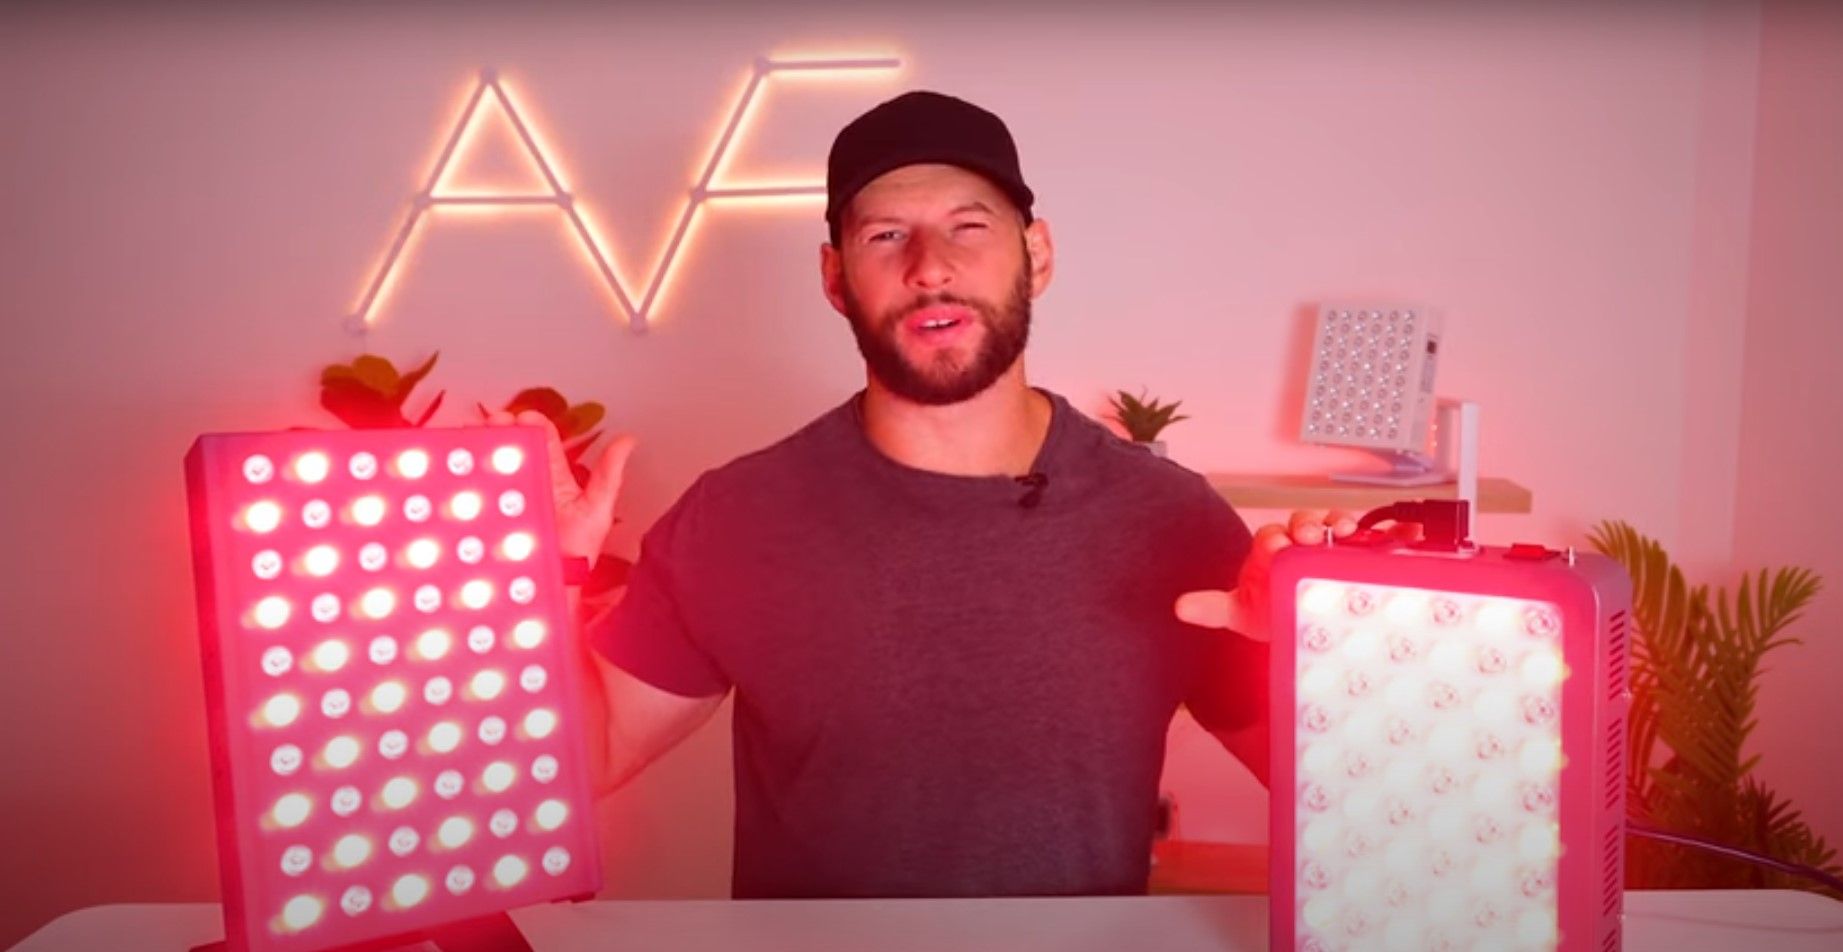 Alex reviews two Hooga light therapy tabletop panels